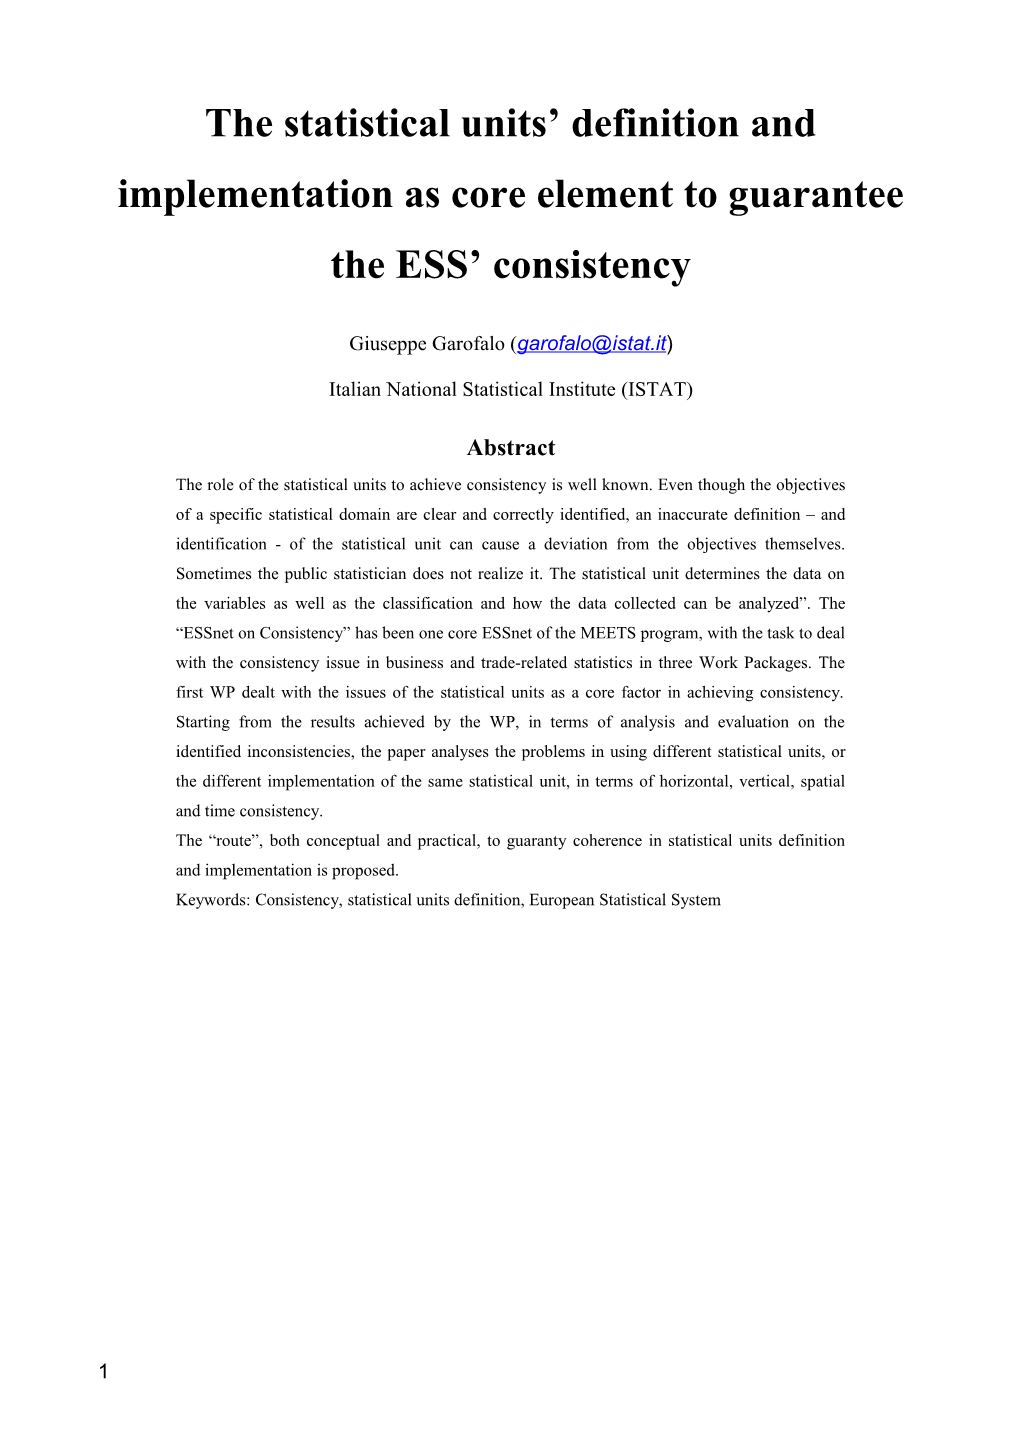 The Statistical Units Definition and Implementation As Core Element to Guarantee the ESS